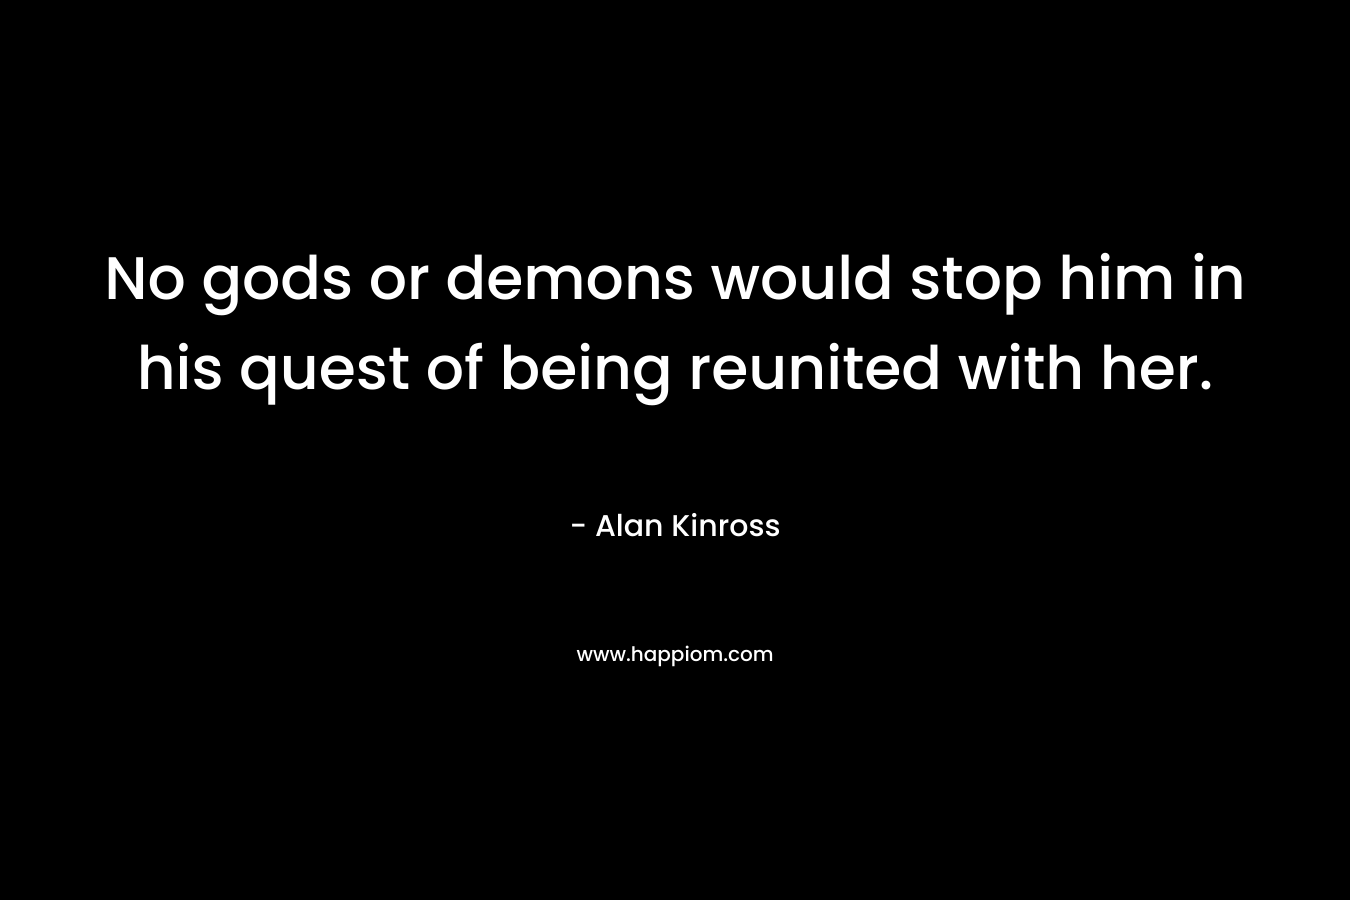 No gods or demons would stop him in his quest of being reunited with her. – Alan Kinross